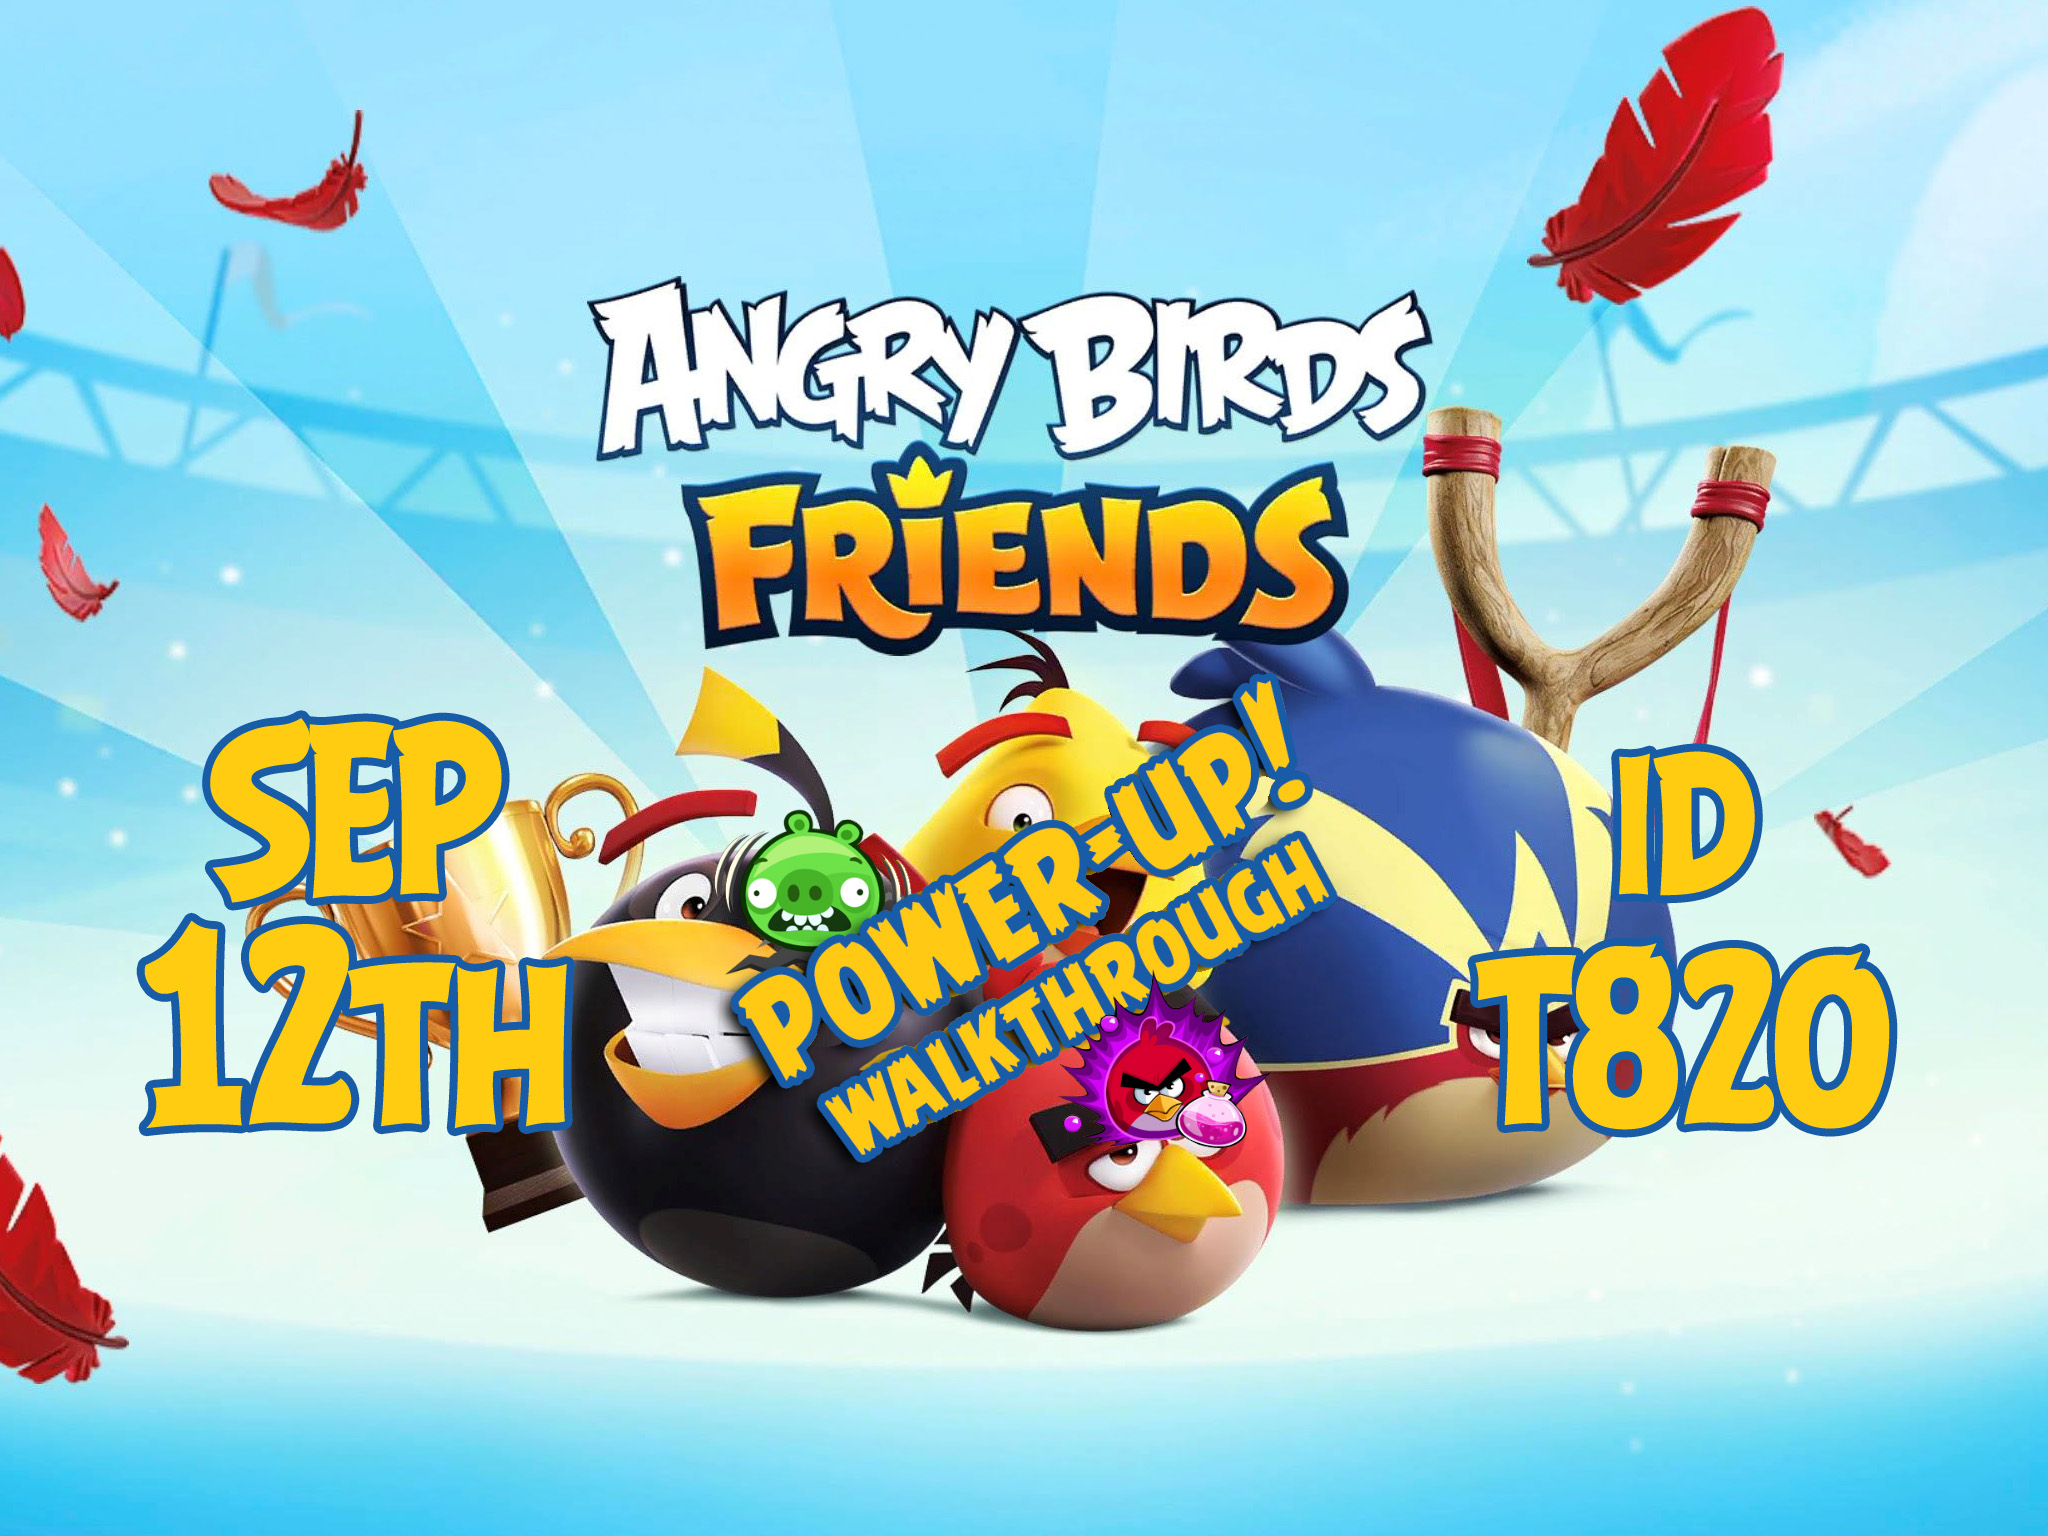 Angry-Birds-Friends-Tournament-T820-Feature-Image-PU